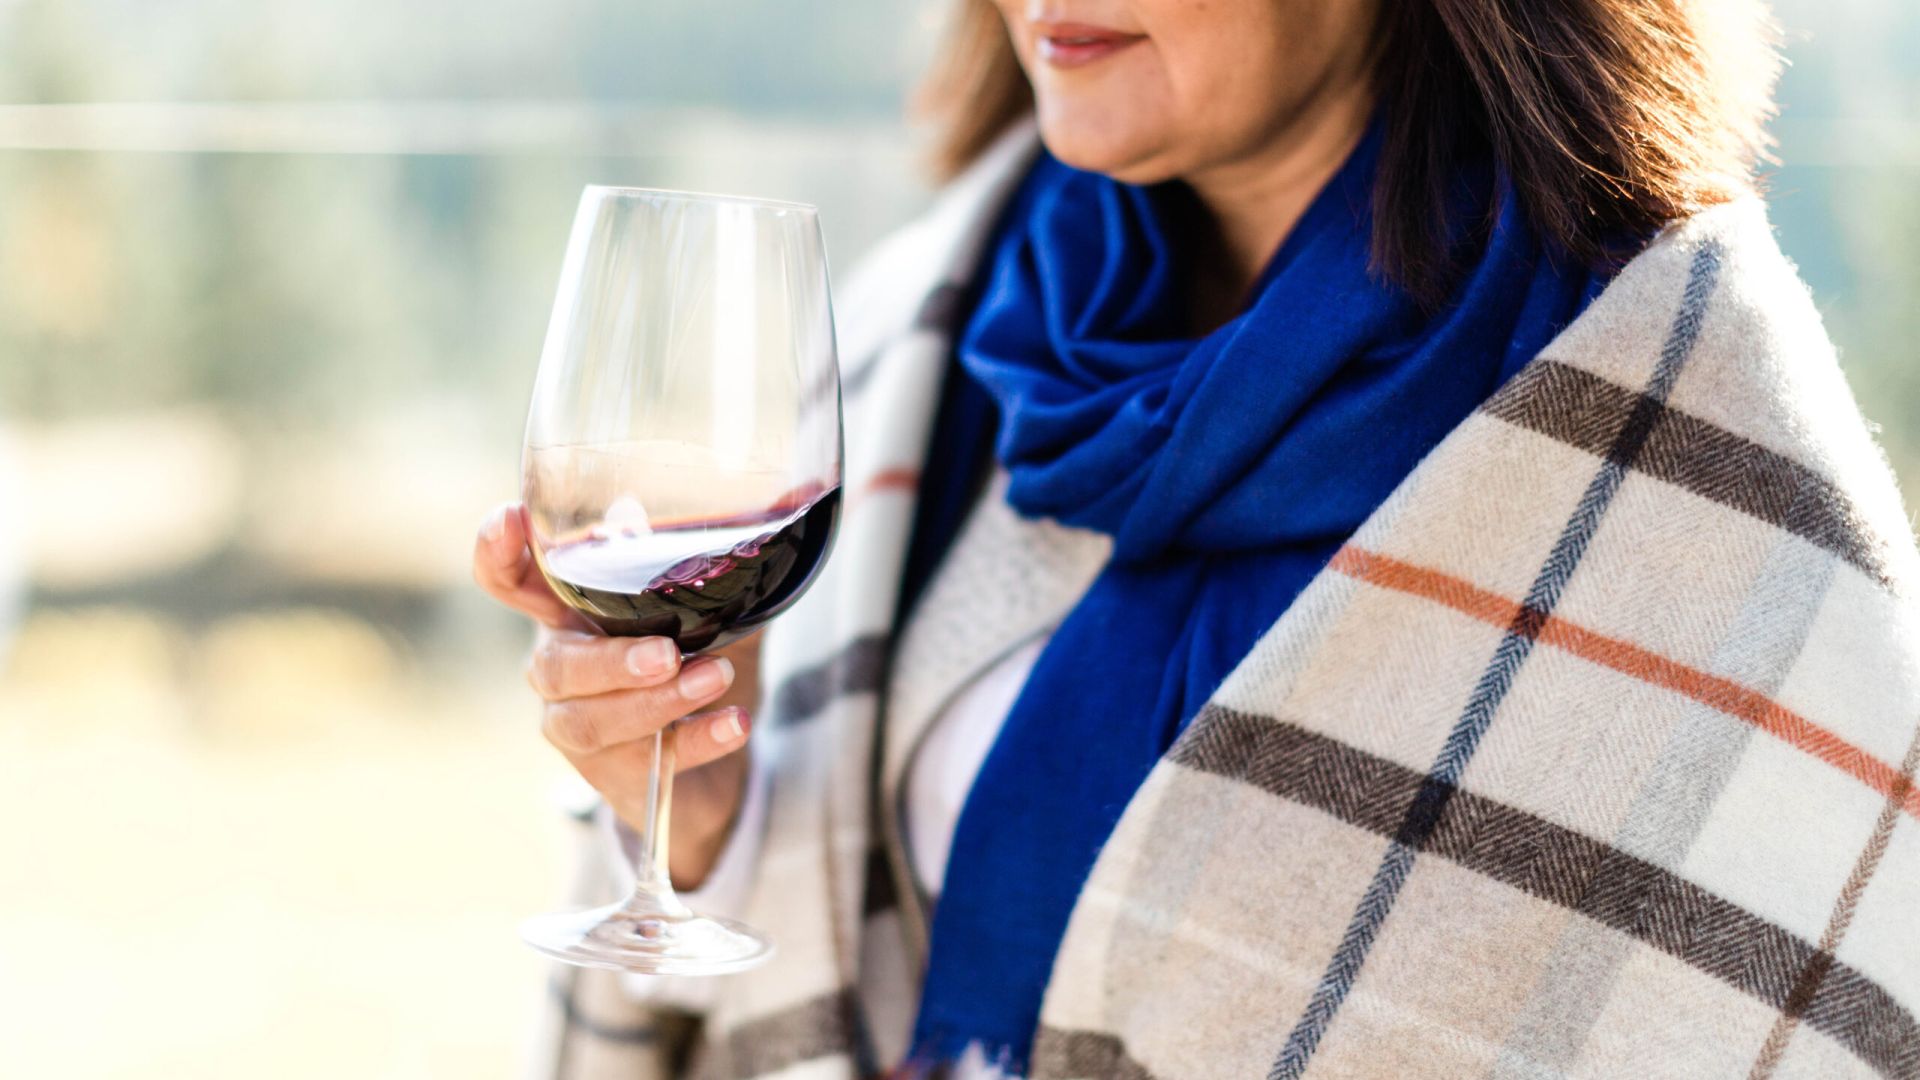 Where to Wine Taste this Winter in Osoyoos